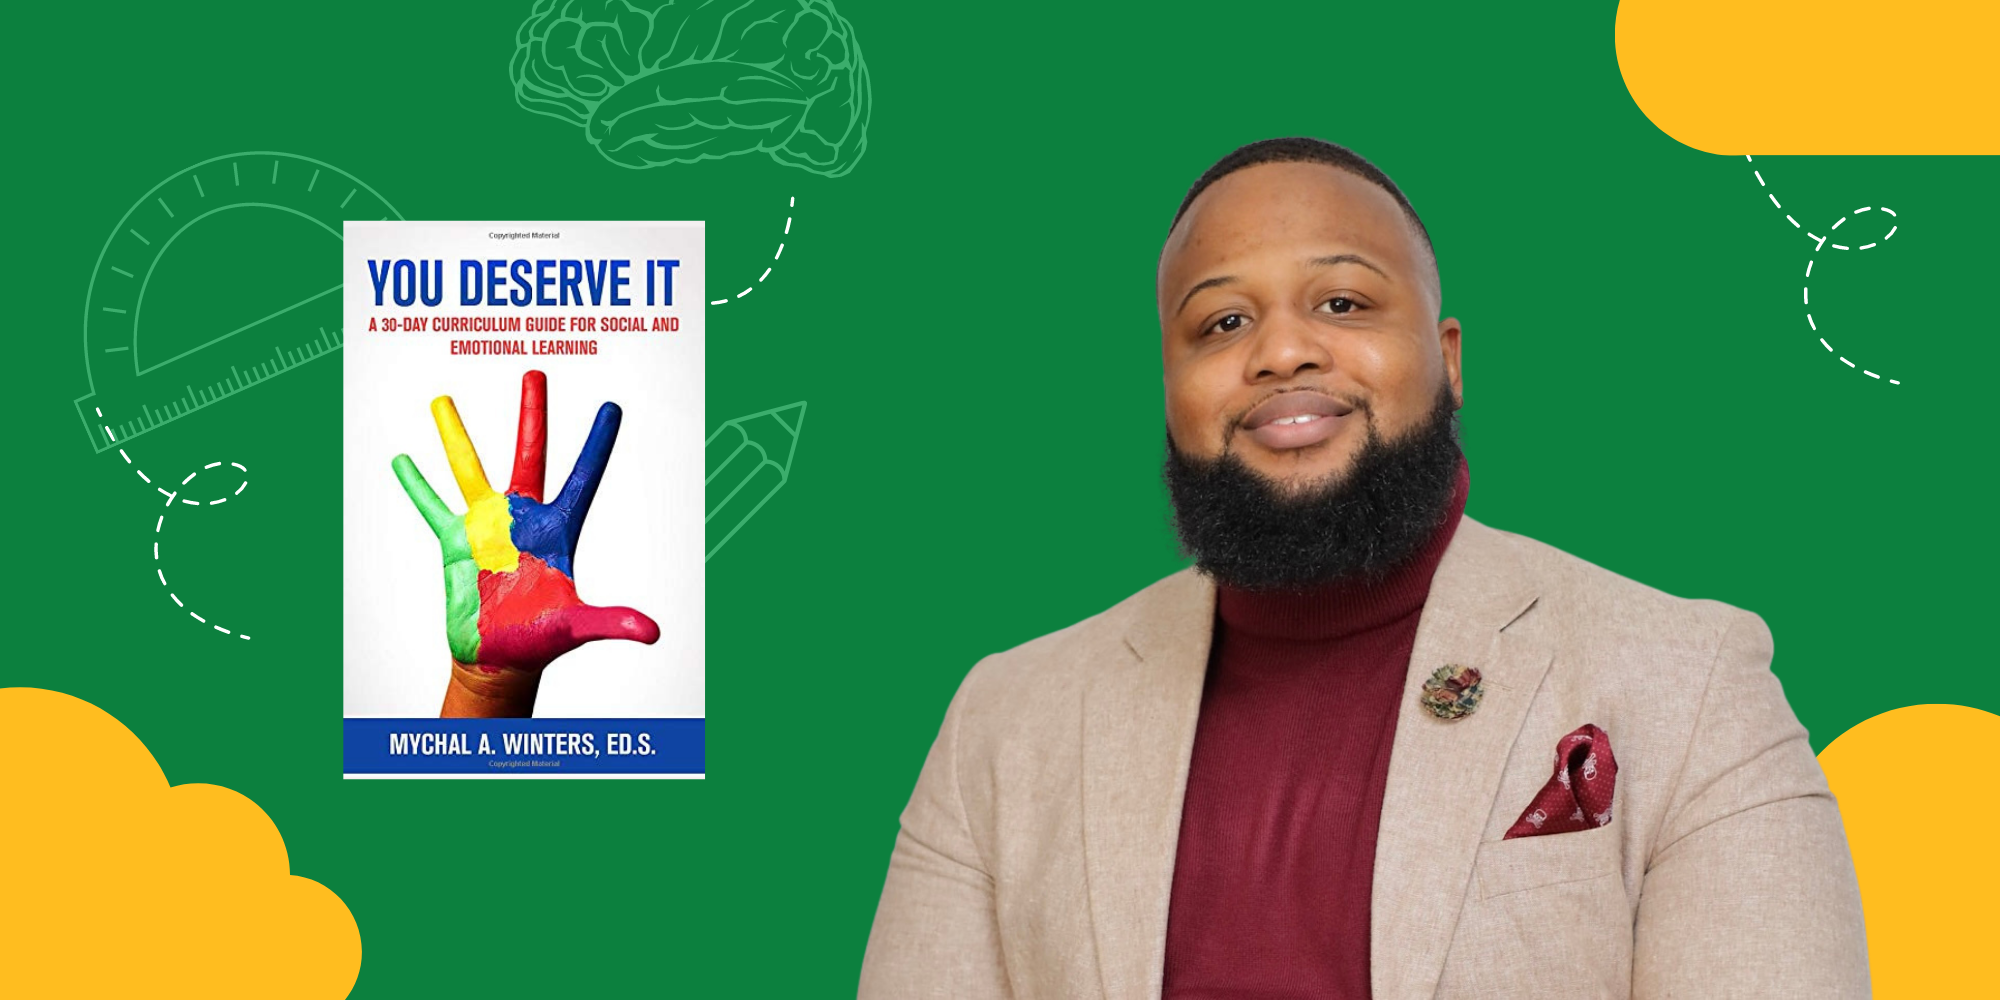 Mychal is smiling and wearing a tan blazer next to his book, You Deserve It: A 30-Day Curriculum Guide to Social and Emotional Learning